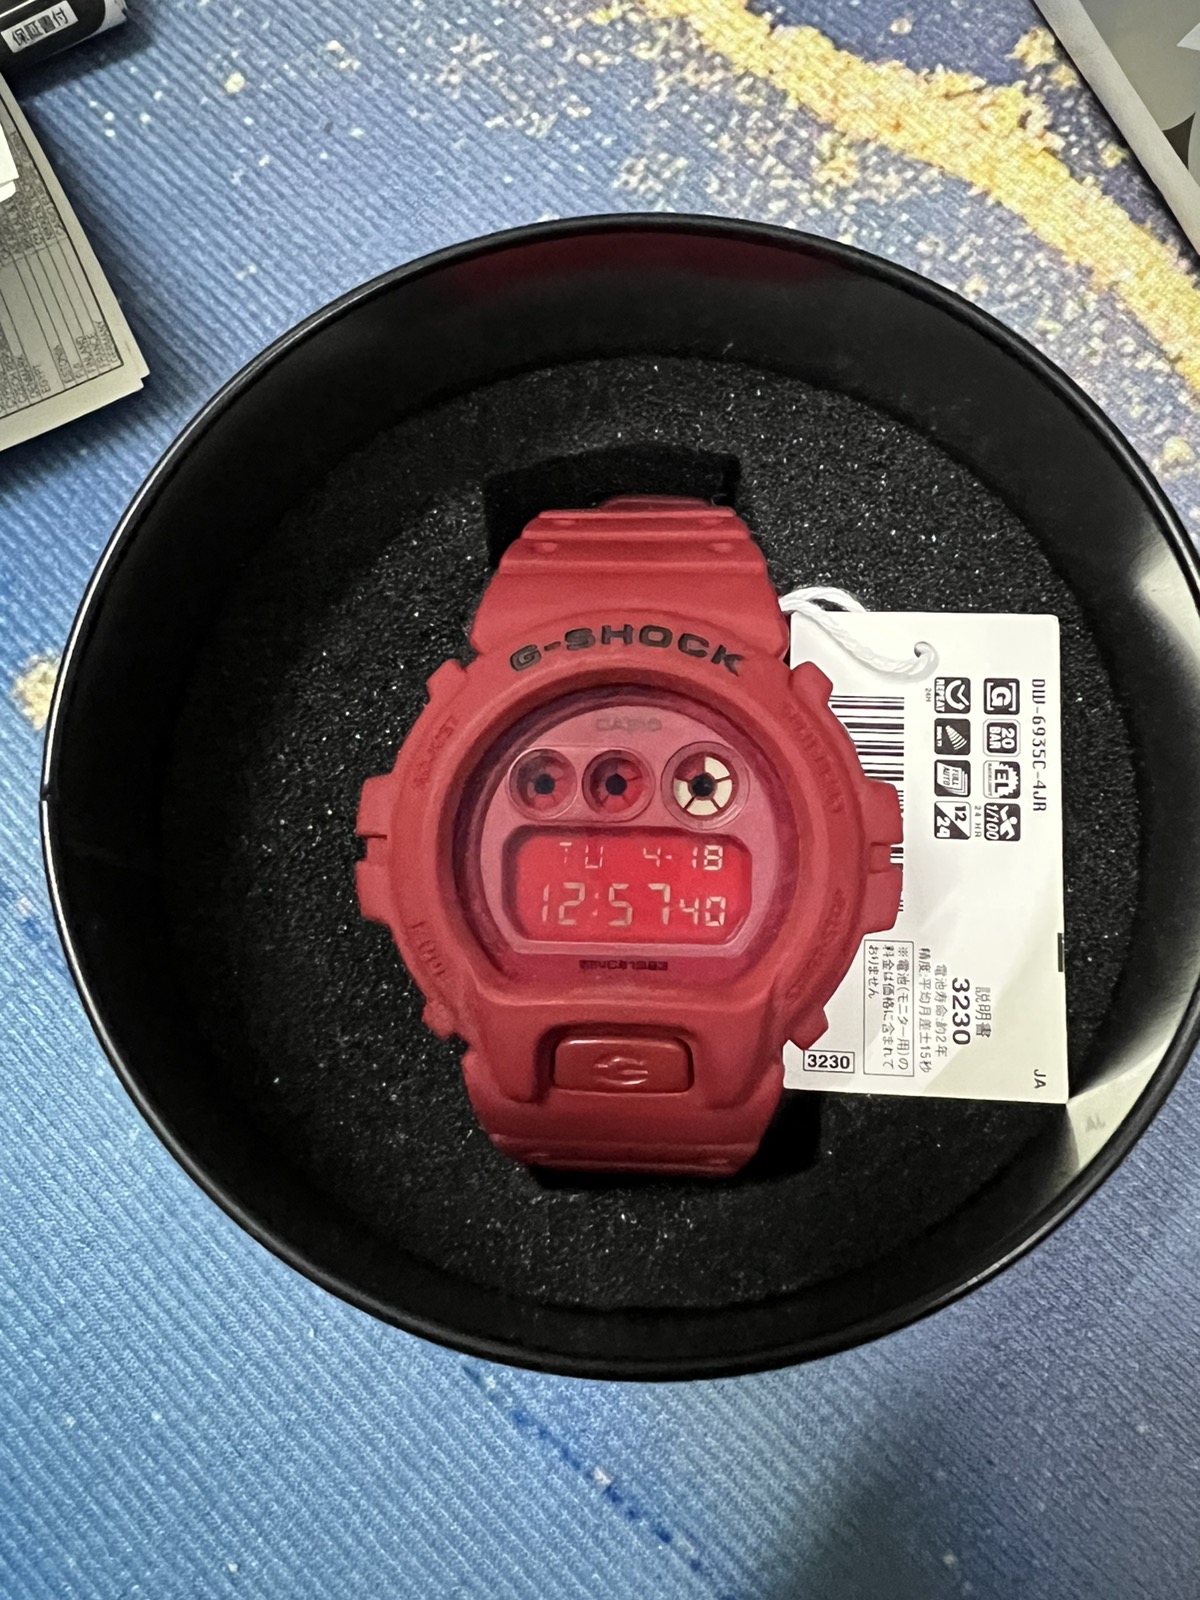 G SHOCK 35 ANNIVERSARY LIMITED EDITION - 1